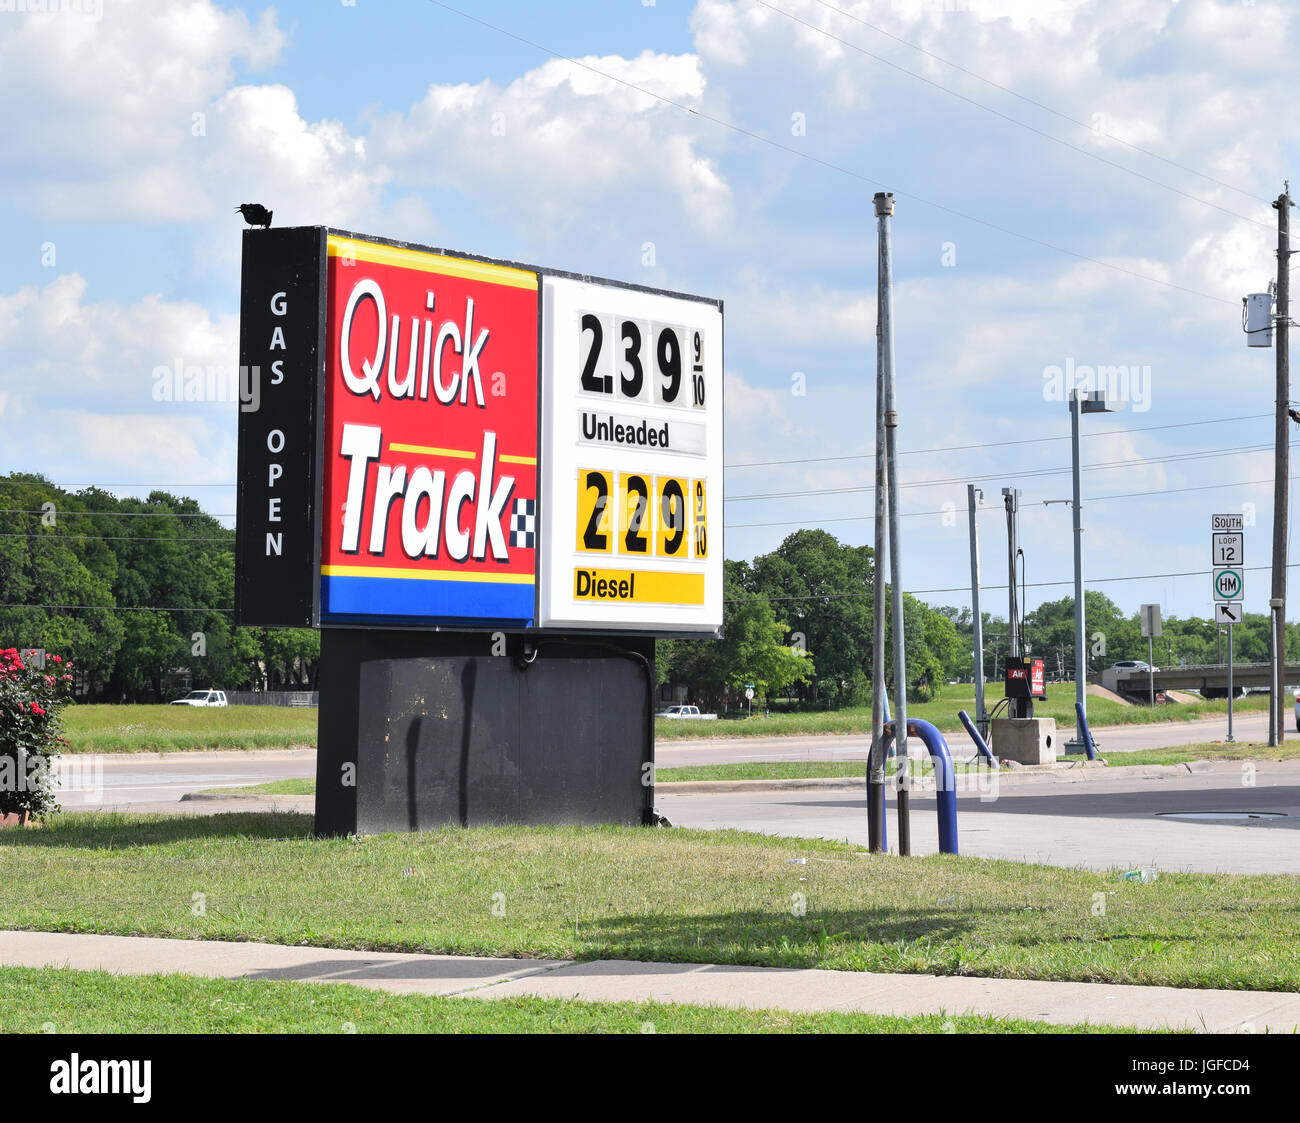 Quick Track American Petrol Station sign with gas prices (gas station sign) Stock Photo